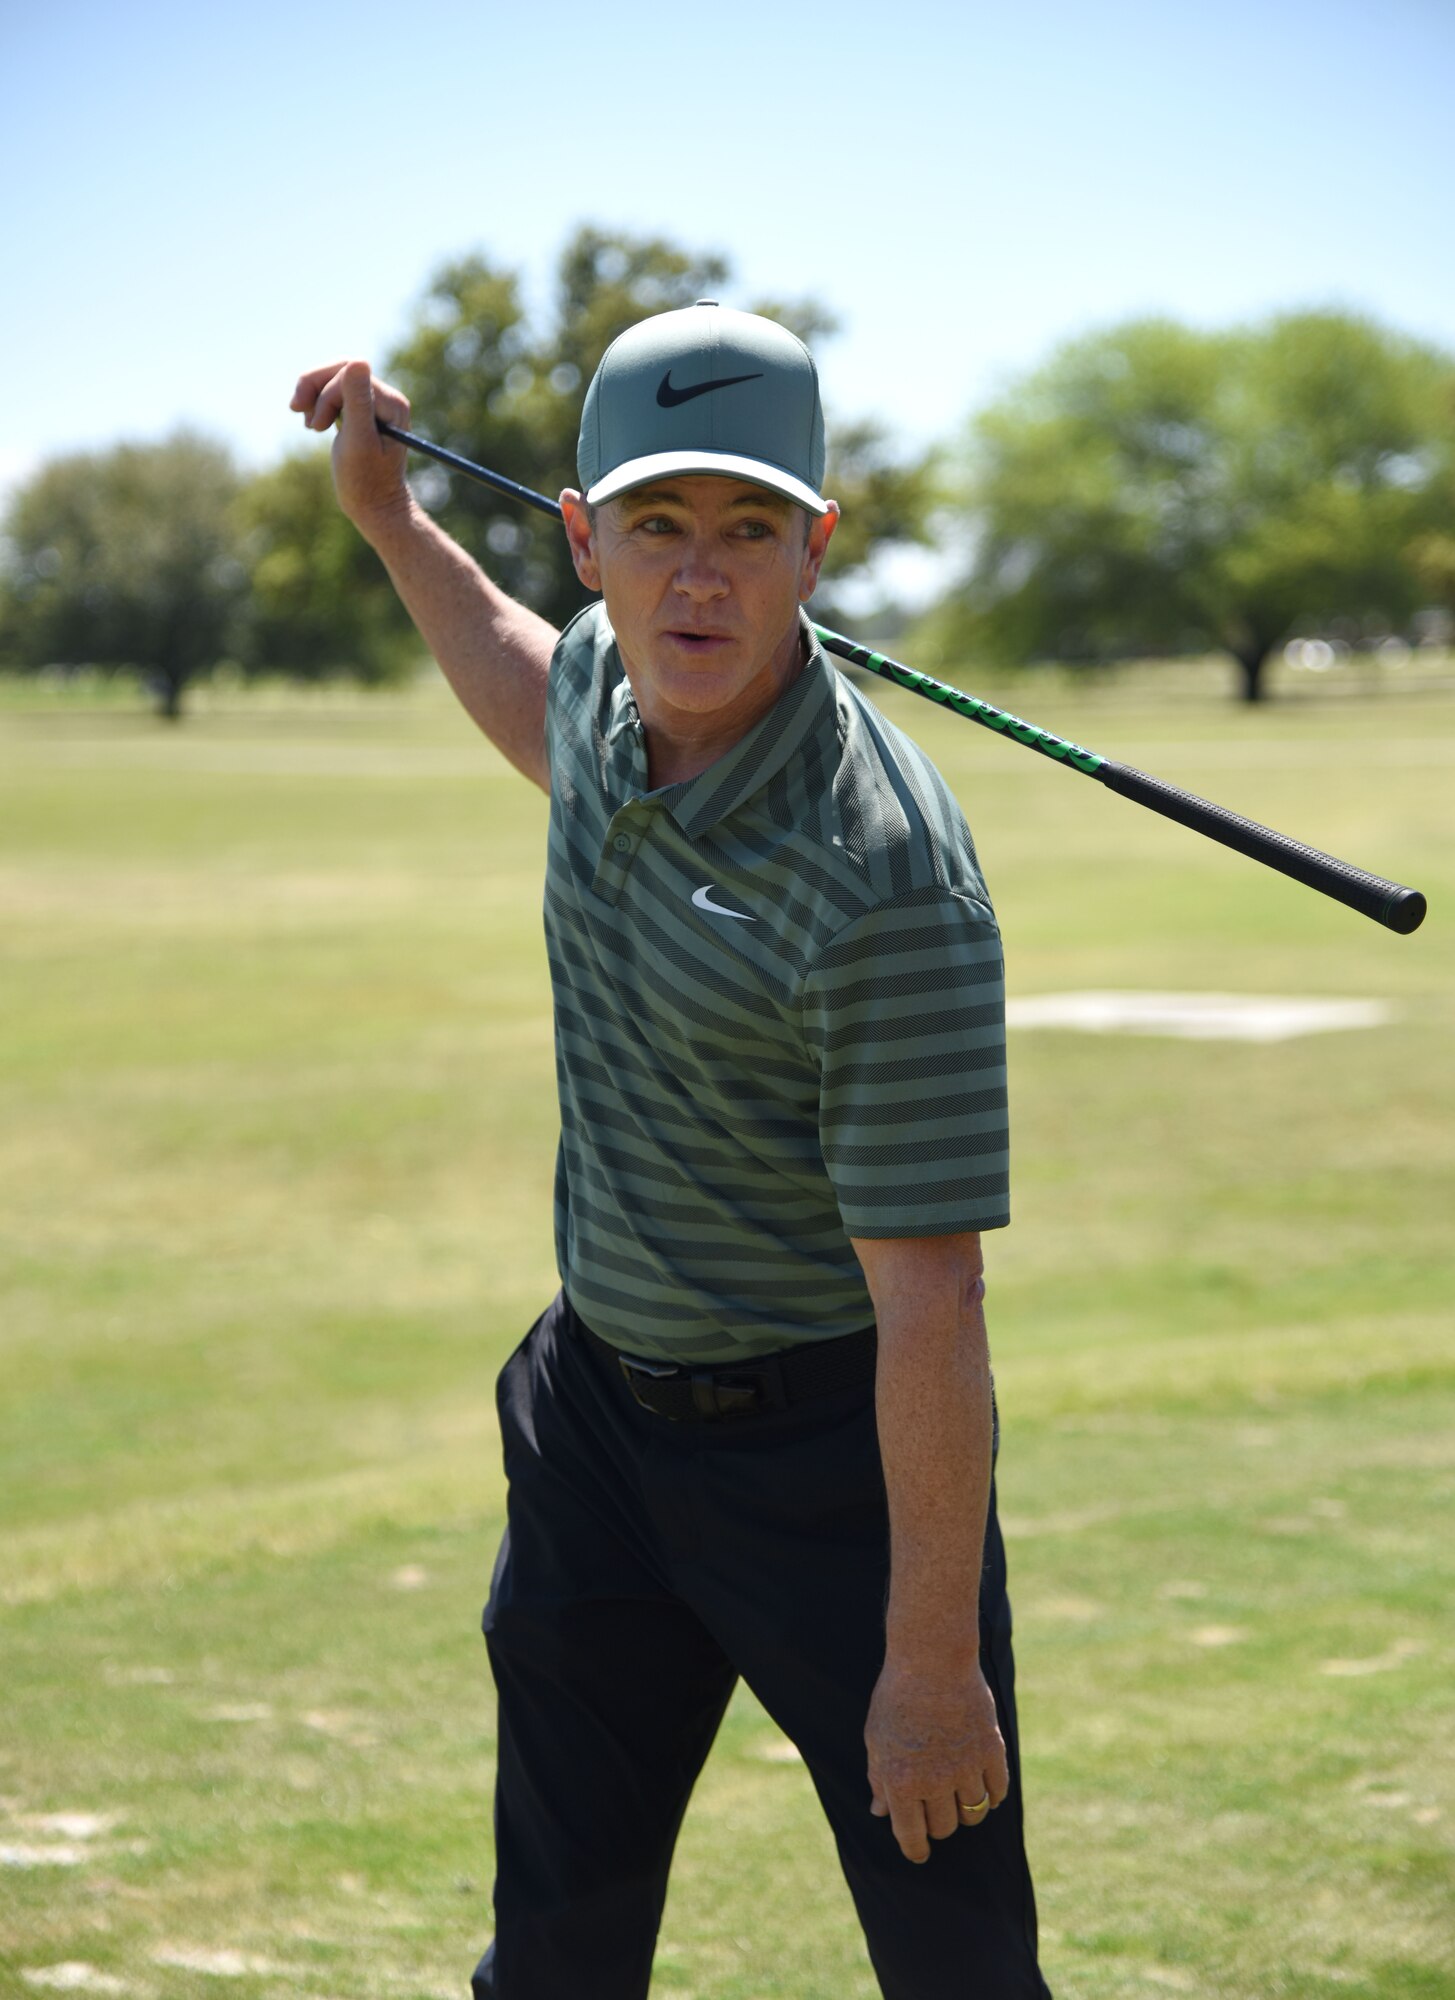 Brian Henninger, Professional Golfers’ Association champion player, provides golfing tips to Keesler personnel during a free clinic at the Bay Breeze Golf Course March 20, 2018, on Keesler Air Force Base, Mississippi. Henninger is a two-time PGA and three-time nationwide tour champion and this is the first time he has held a clinic at Keesler. (U.S. Air Force photo by Kemberly Groue)